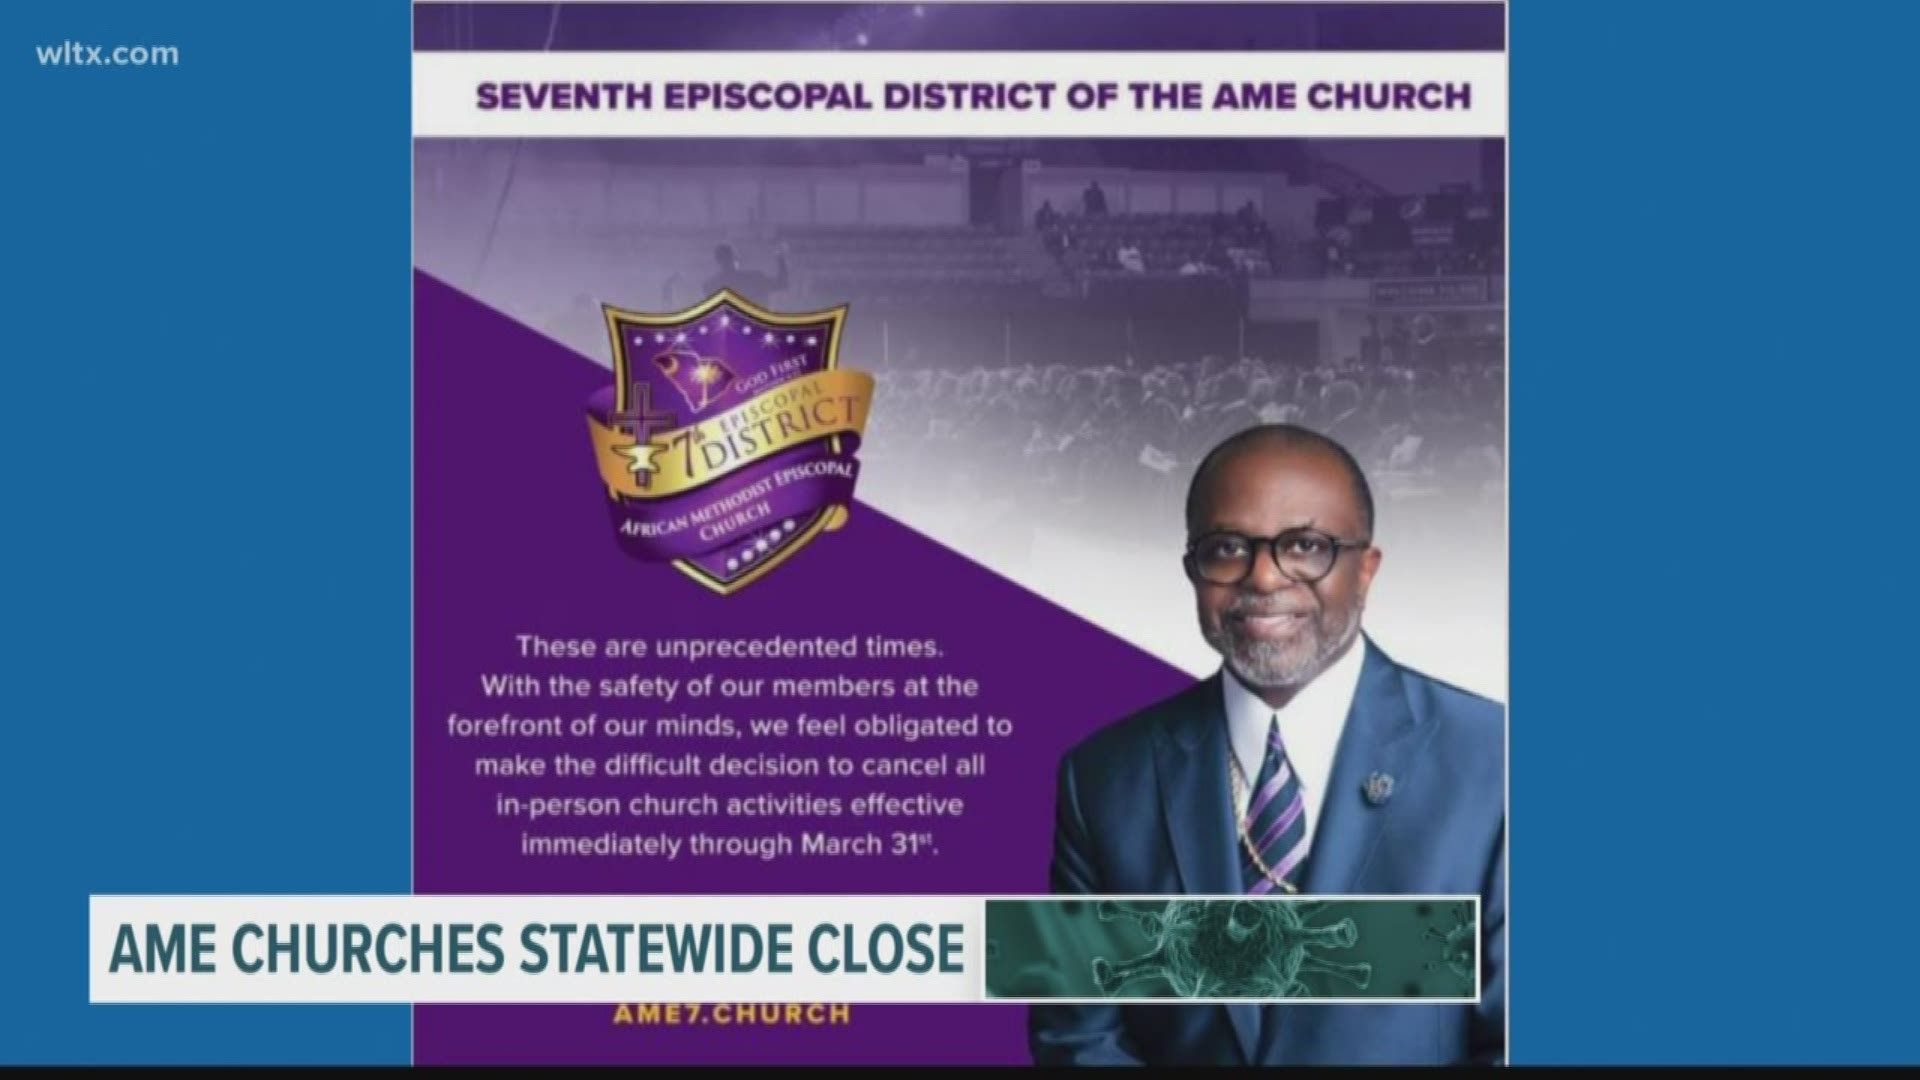 Around 600 AME churches in the state will close as a precaution due to the COVID-19 virus.